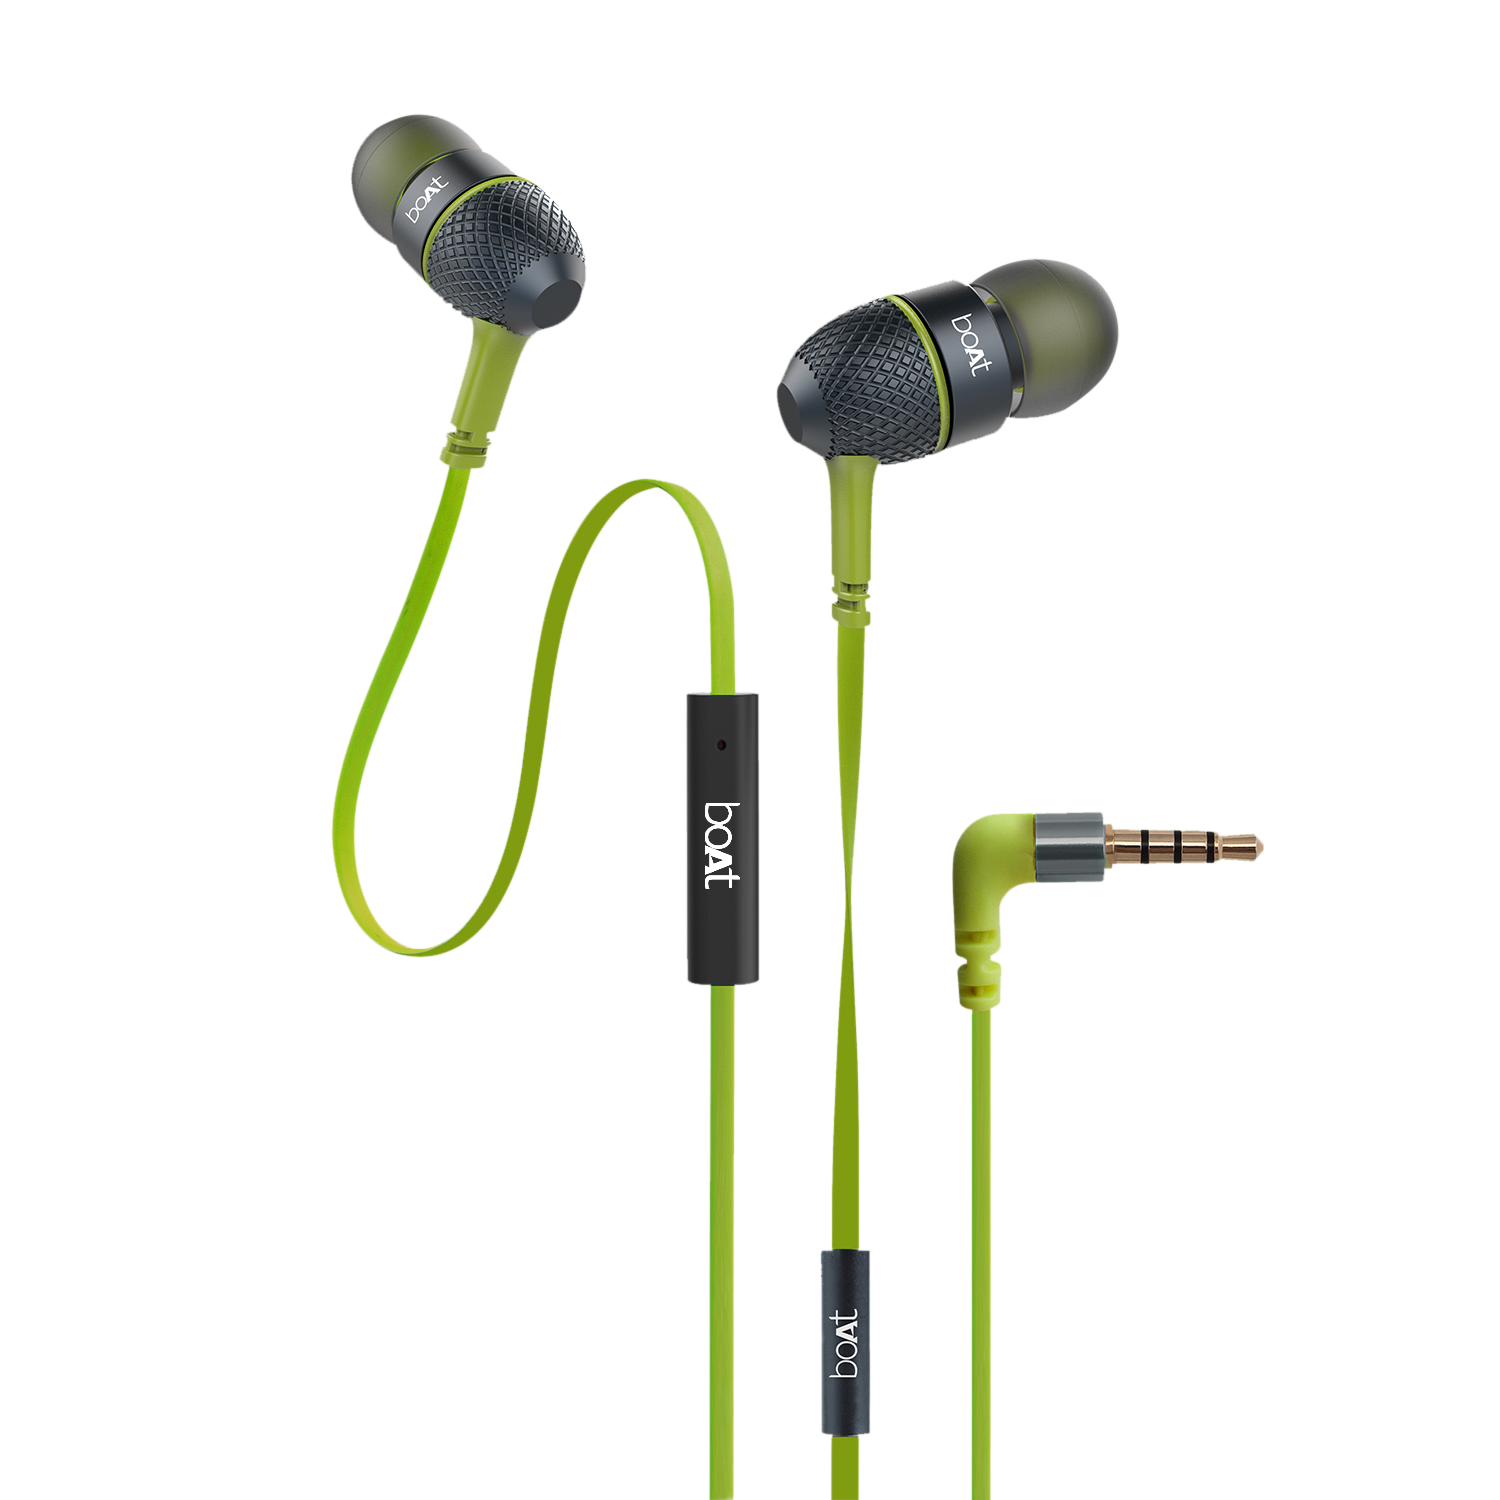 Bassheads 220  Wired Earphones with Passive Noise Cancellation, Super